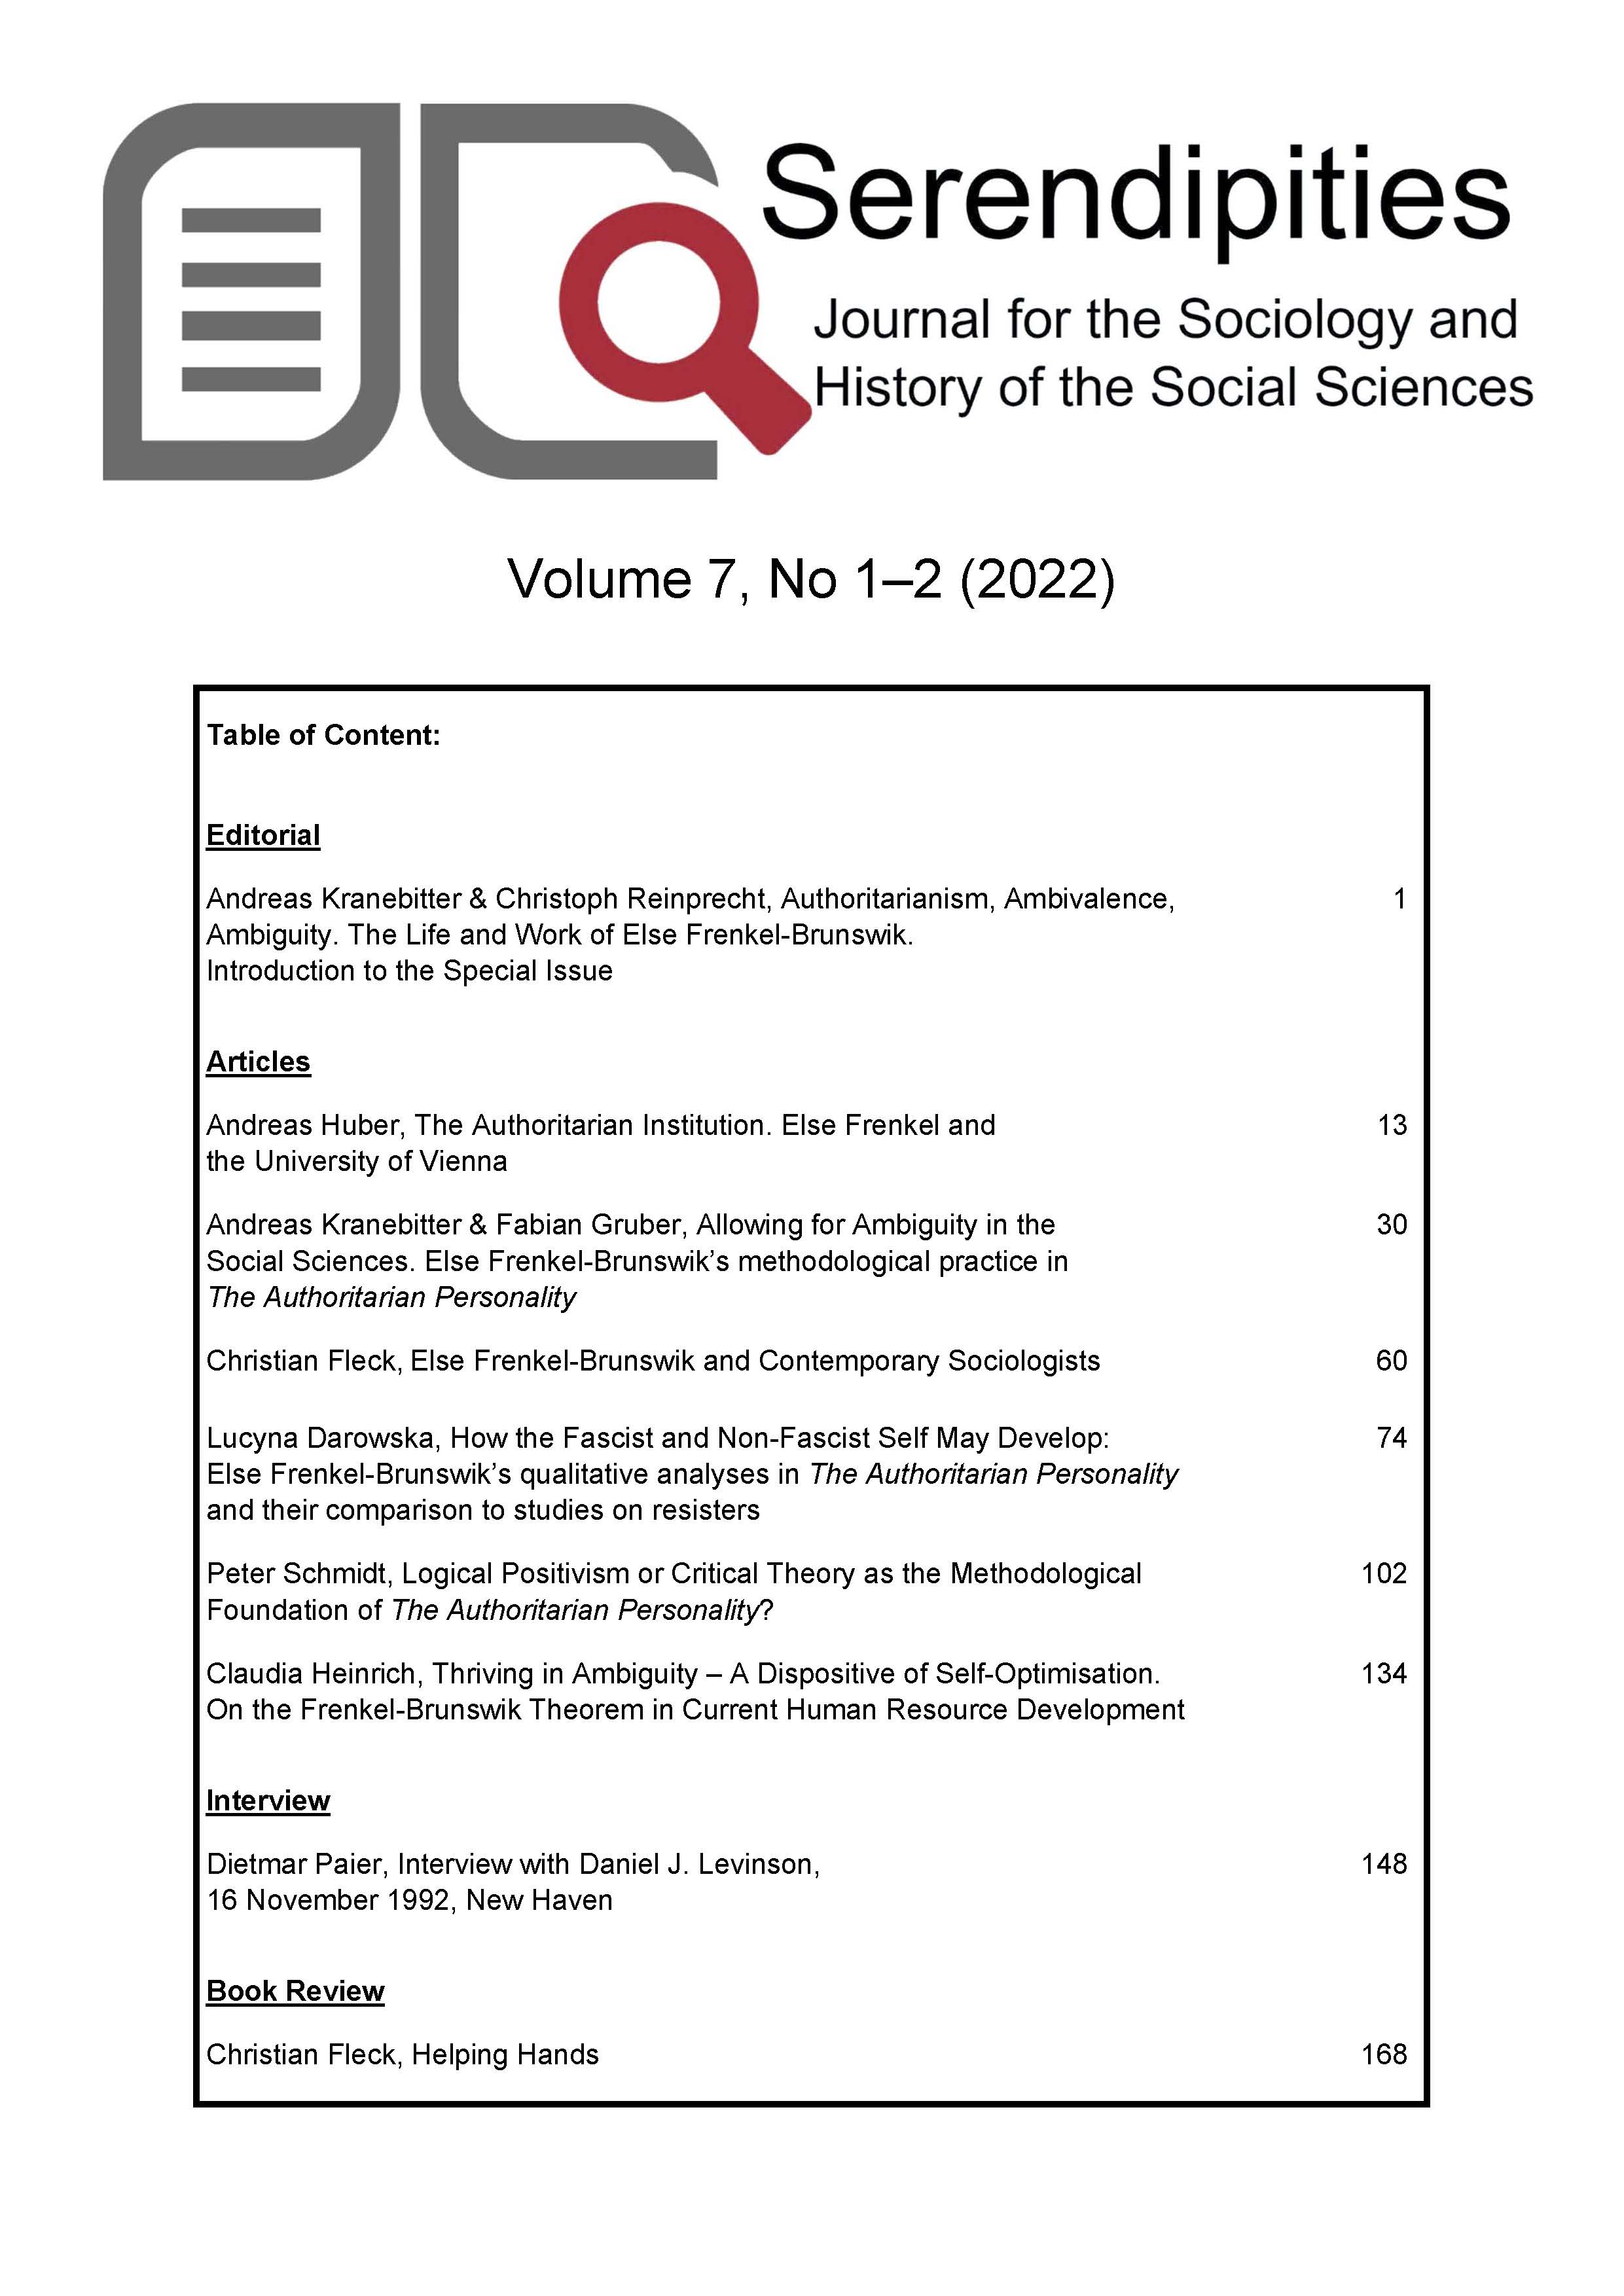 					View Vol. 7 No. 1-2 (2022): Serendipities. Journal for the Sociology and History of the Social Sciences
				